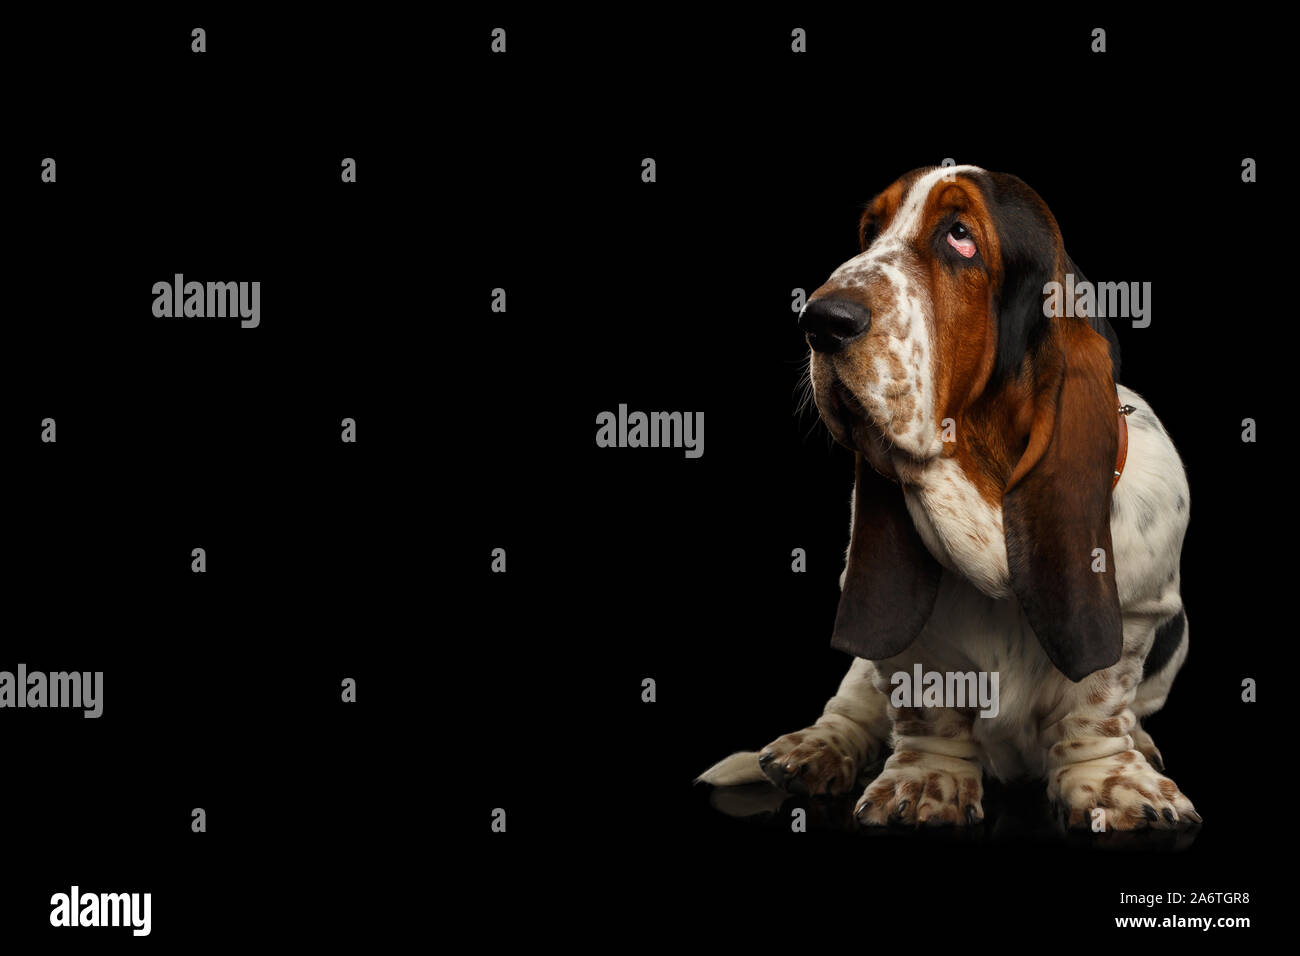 Funny Basset Hound Dog Standing and Looks Apathy on Isolated black background, Stare up Stock Photo